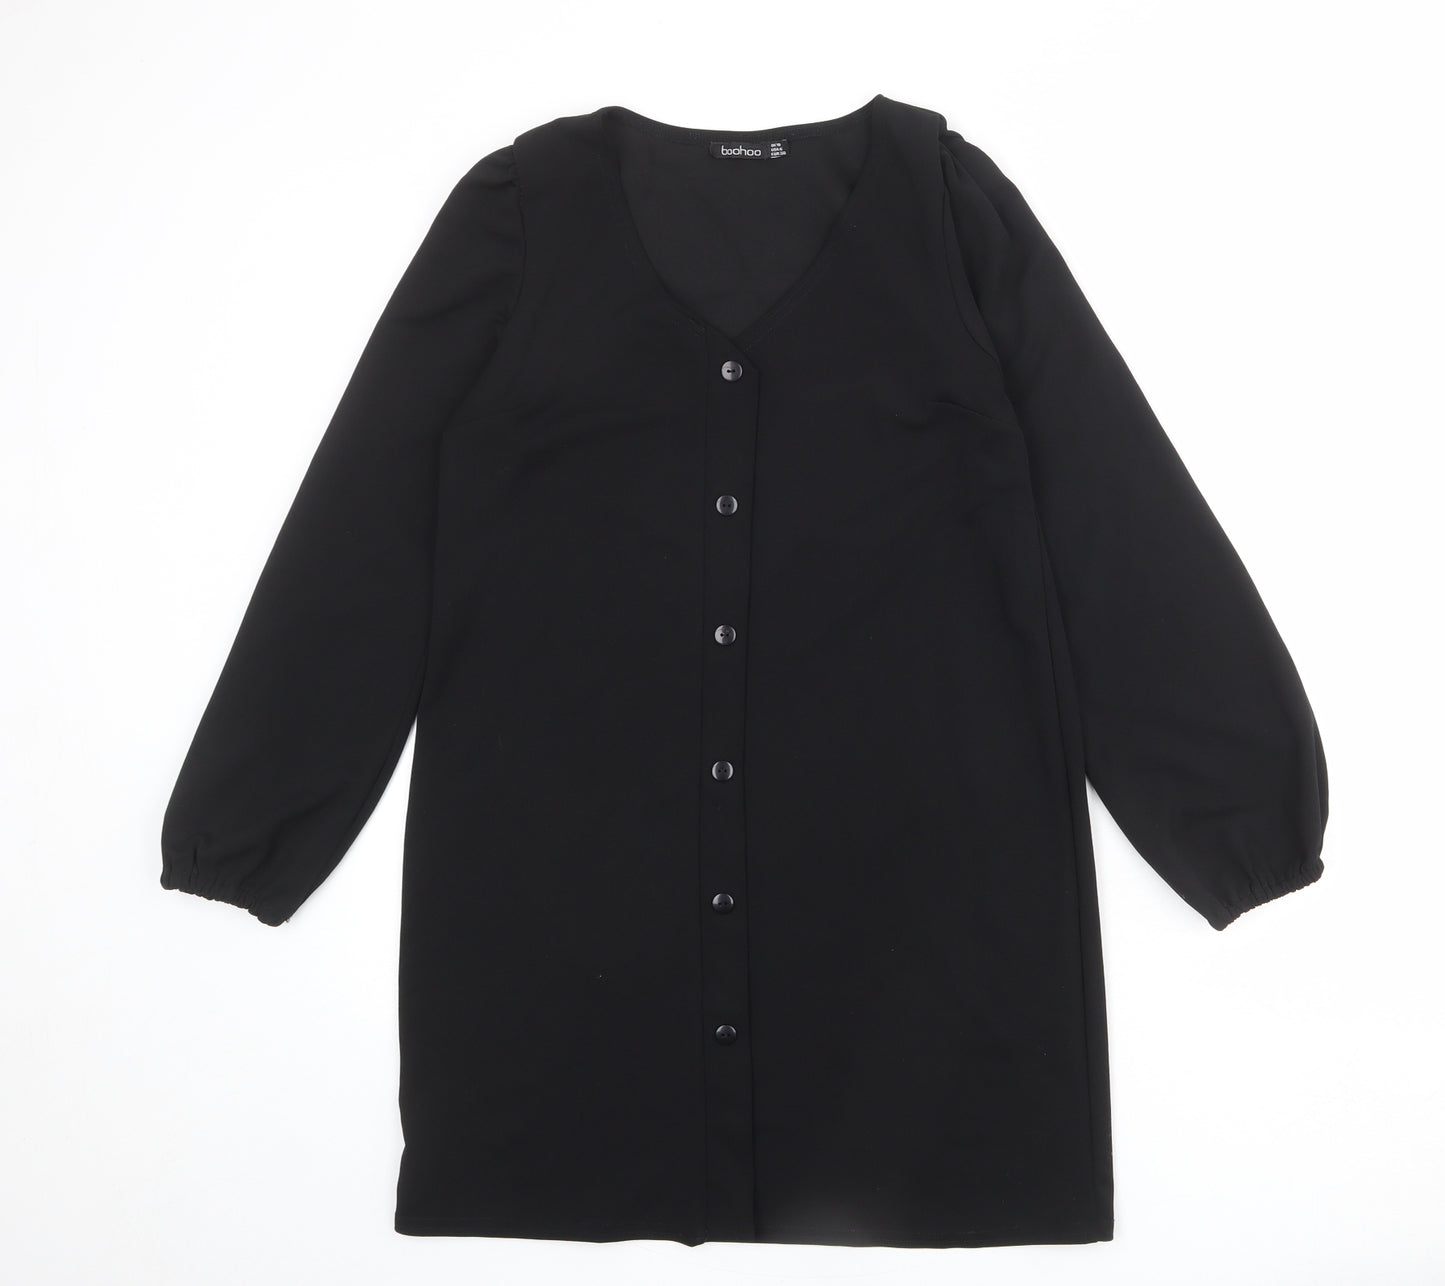 Boohoo Womens Black Polyester Shift Size 10 V-Neck Button